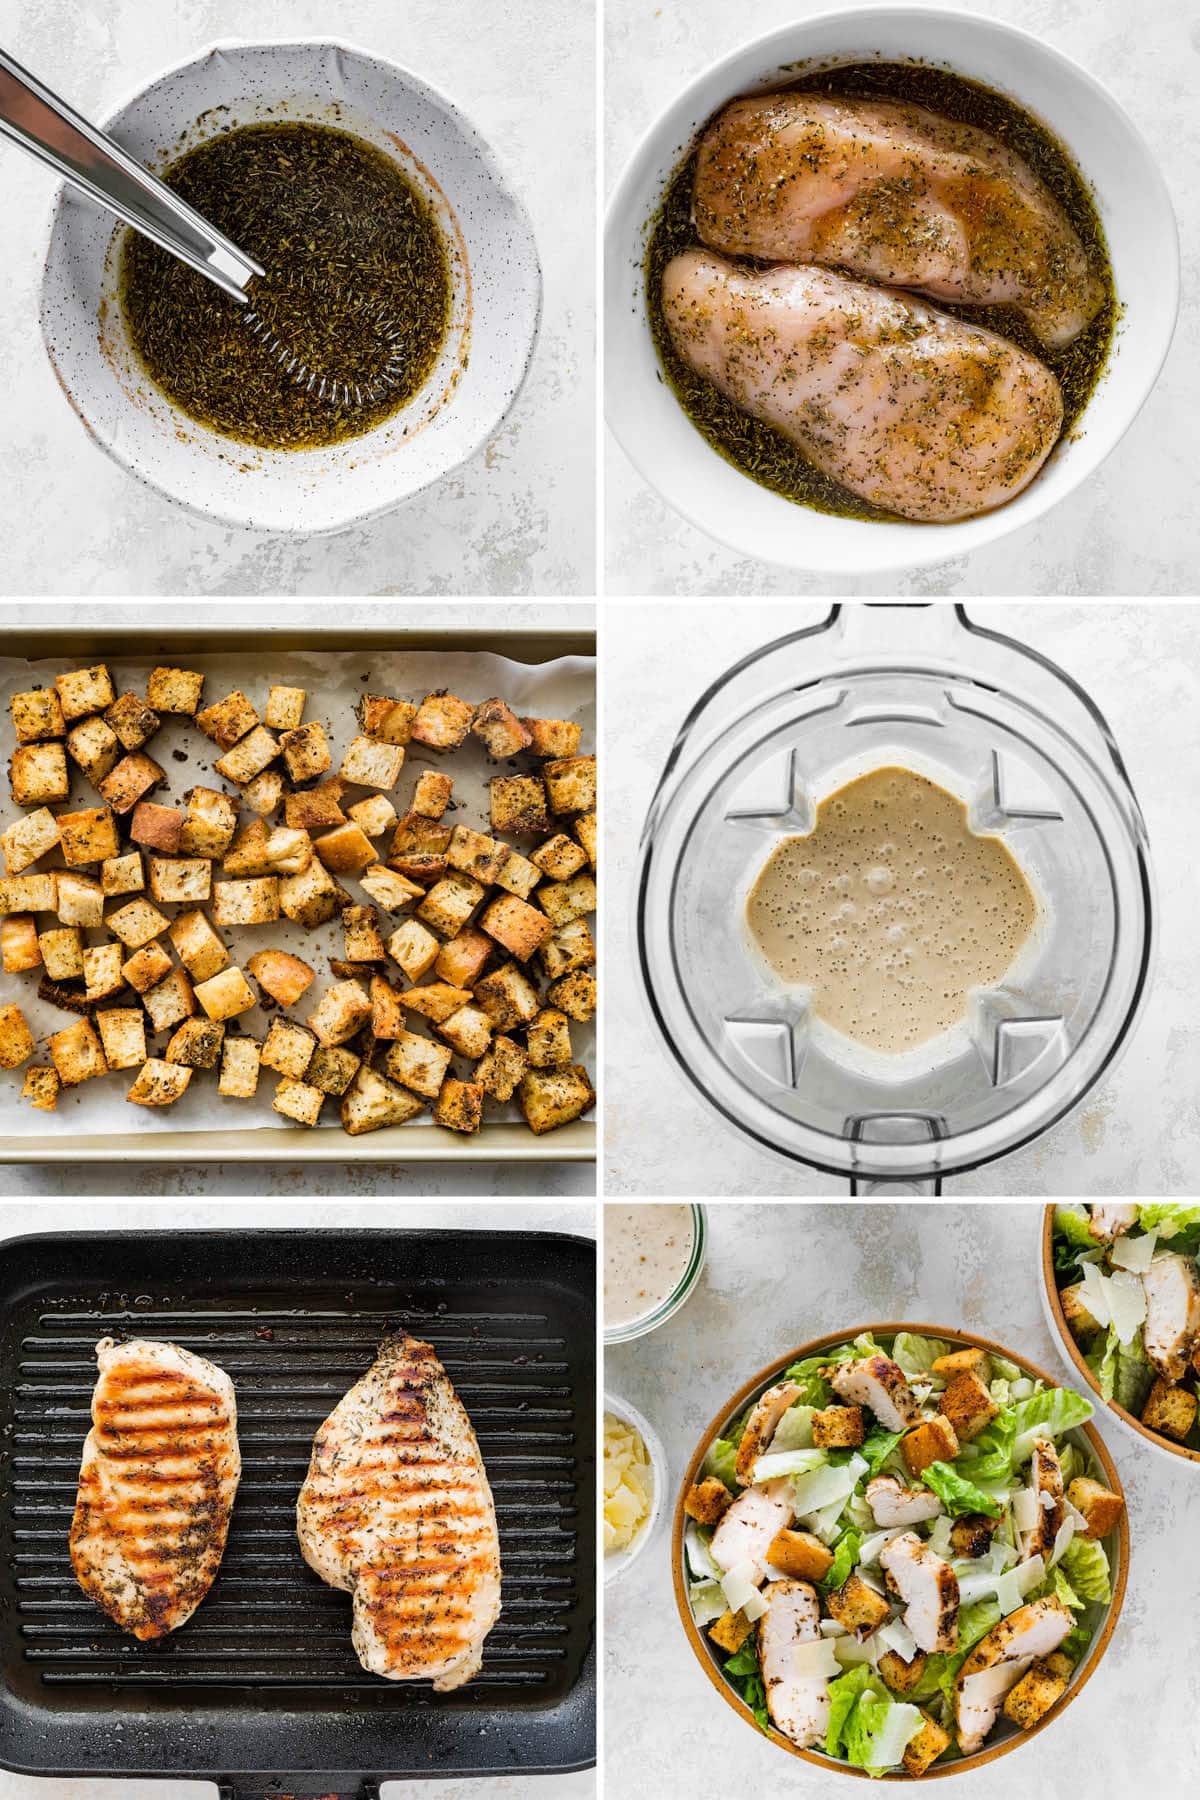 Collage of six photos showing the steps to make a grilled chicken Caesar salad: marinate the chicken, bake sourdough croutons, mix in the homemade Caesar dressing, grill the chicken, then assemble the salad.